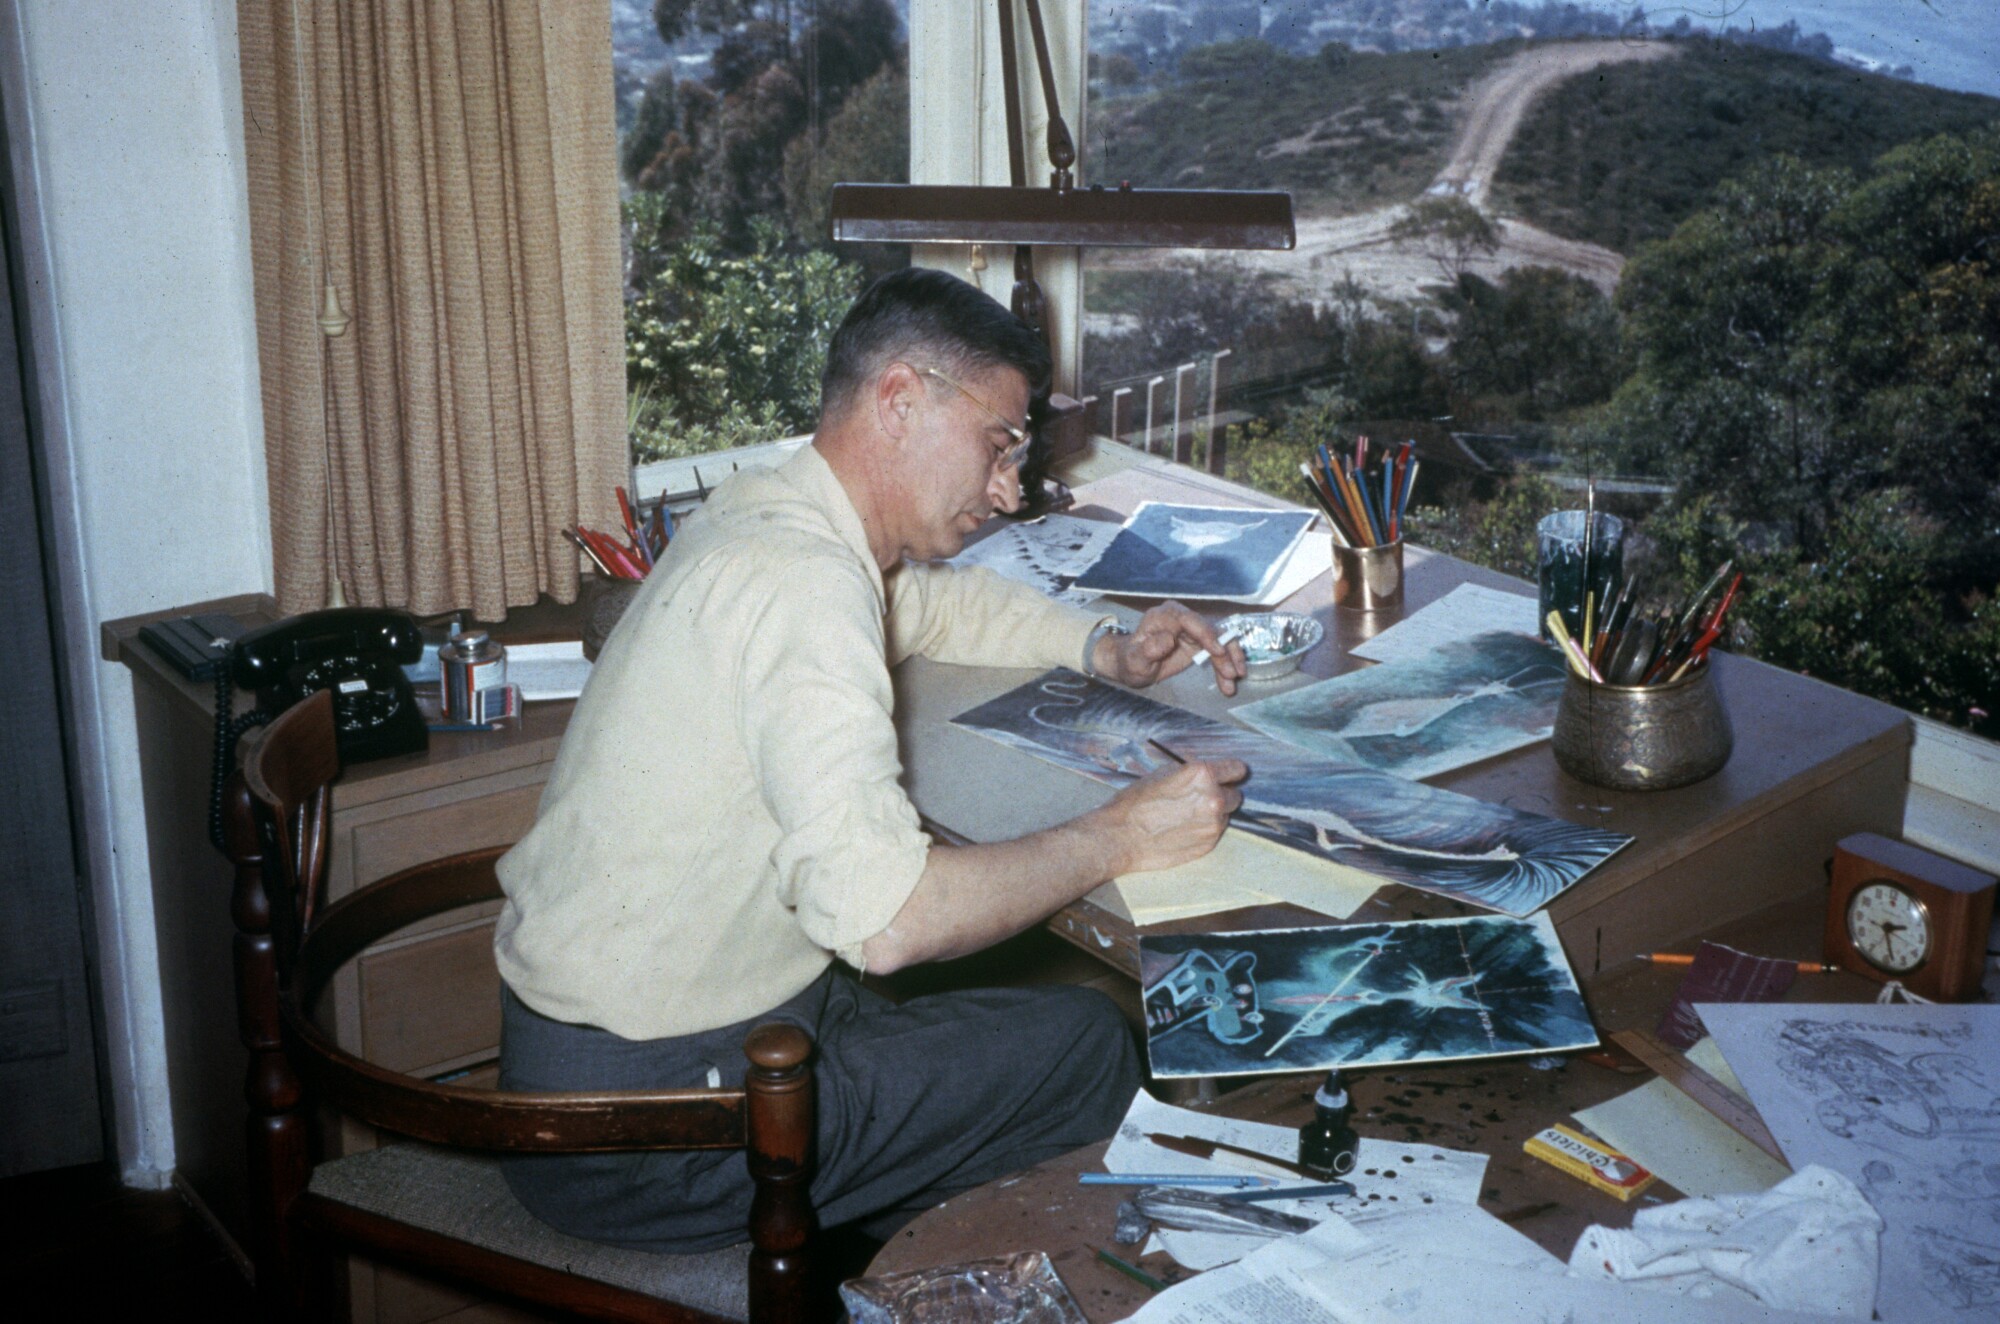 A man draws while sitting at a desk in front of a window that has a view of a slope and the ocean